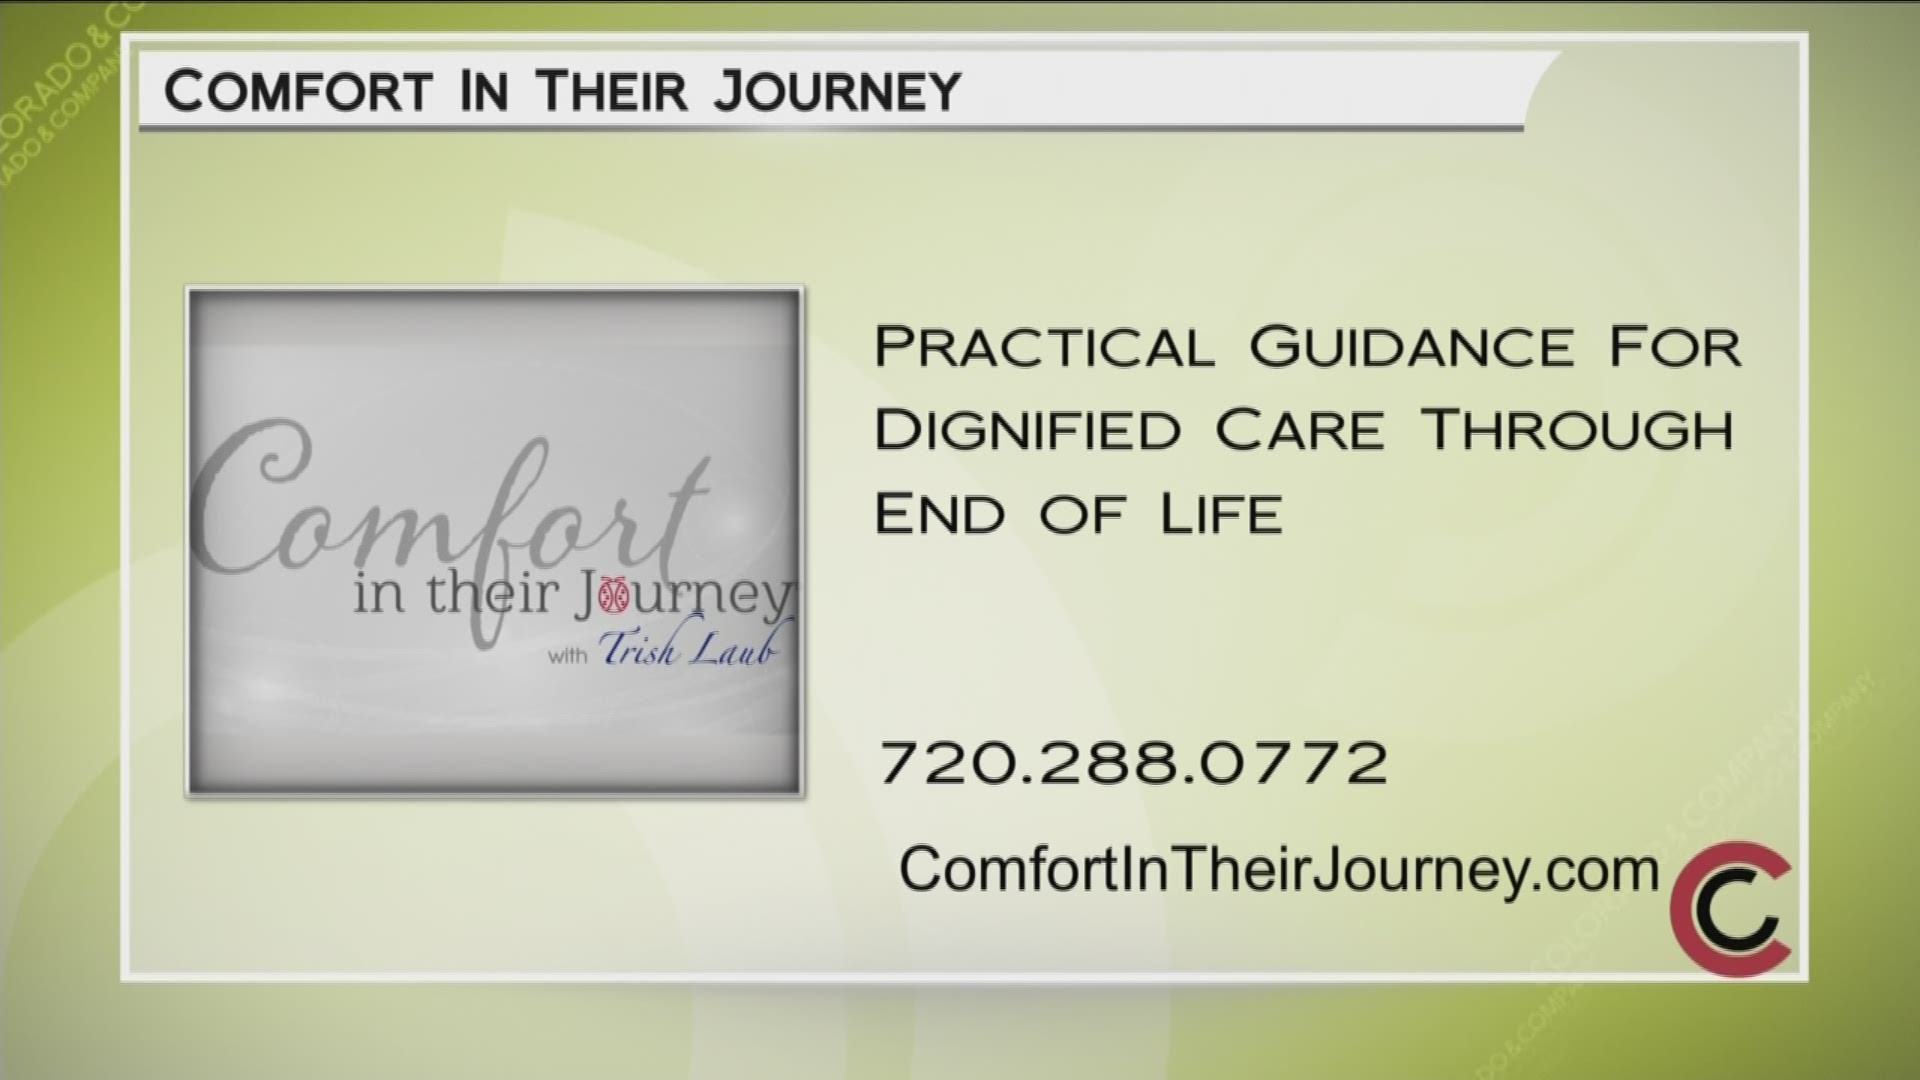 For more information, and to consult with Trish Laub about end of life care, call 720.288.0772. She works with individuals, families, and businesses to help them thrive through the difficult aspects of end of life care and caregiving. Visit www.ComfortInTheirJourney.com to learn more. 
THIS INTERVIEW HAS COMMERCIAL CONTENT. PRODUCTS AND SERVICES FEATURED APPEAR AS PAID ADVERTISING.